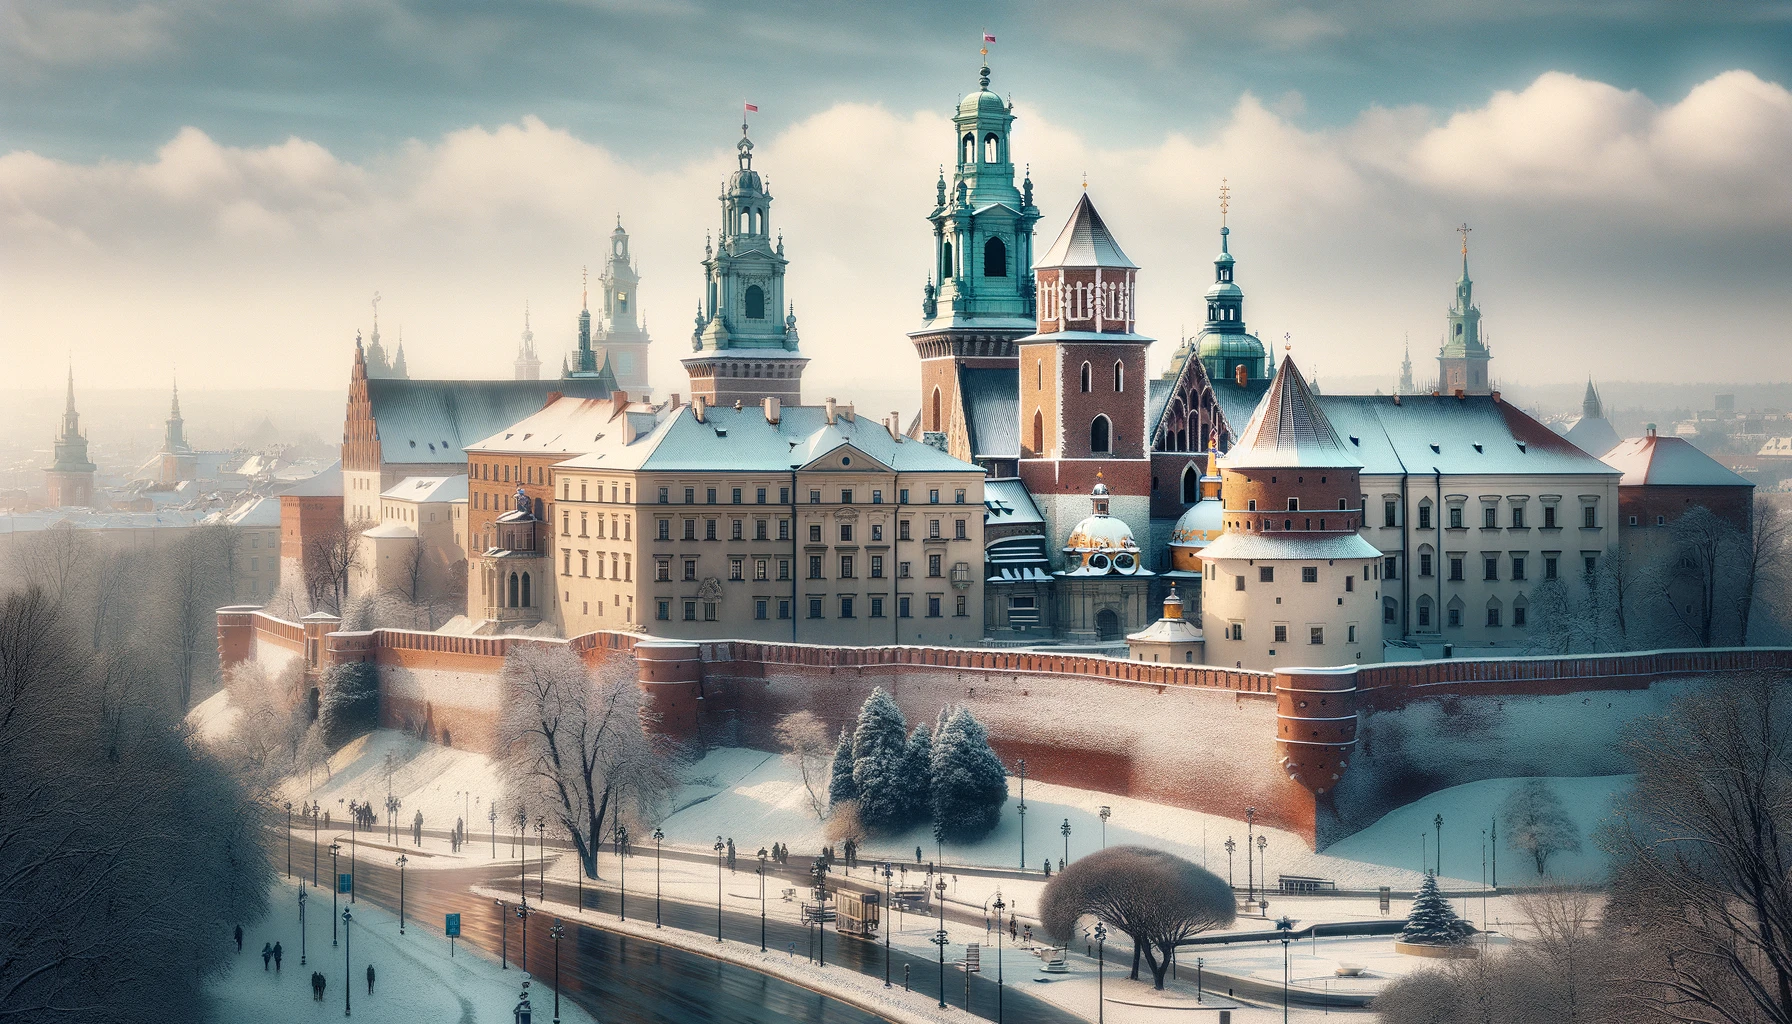 Snowy landscape of Wawel Royal Castle in Krakow, highlighting its majestic architecture